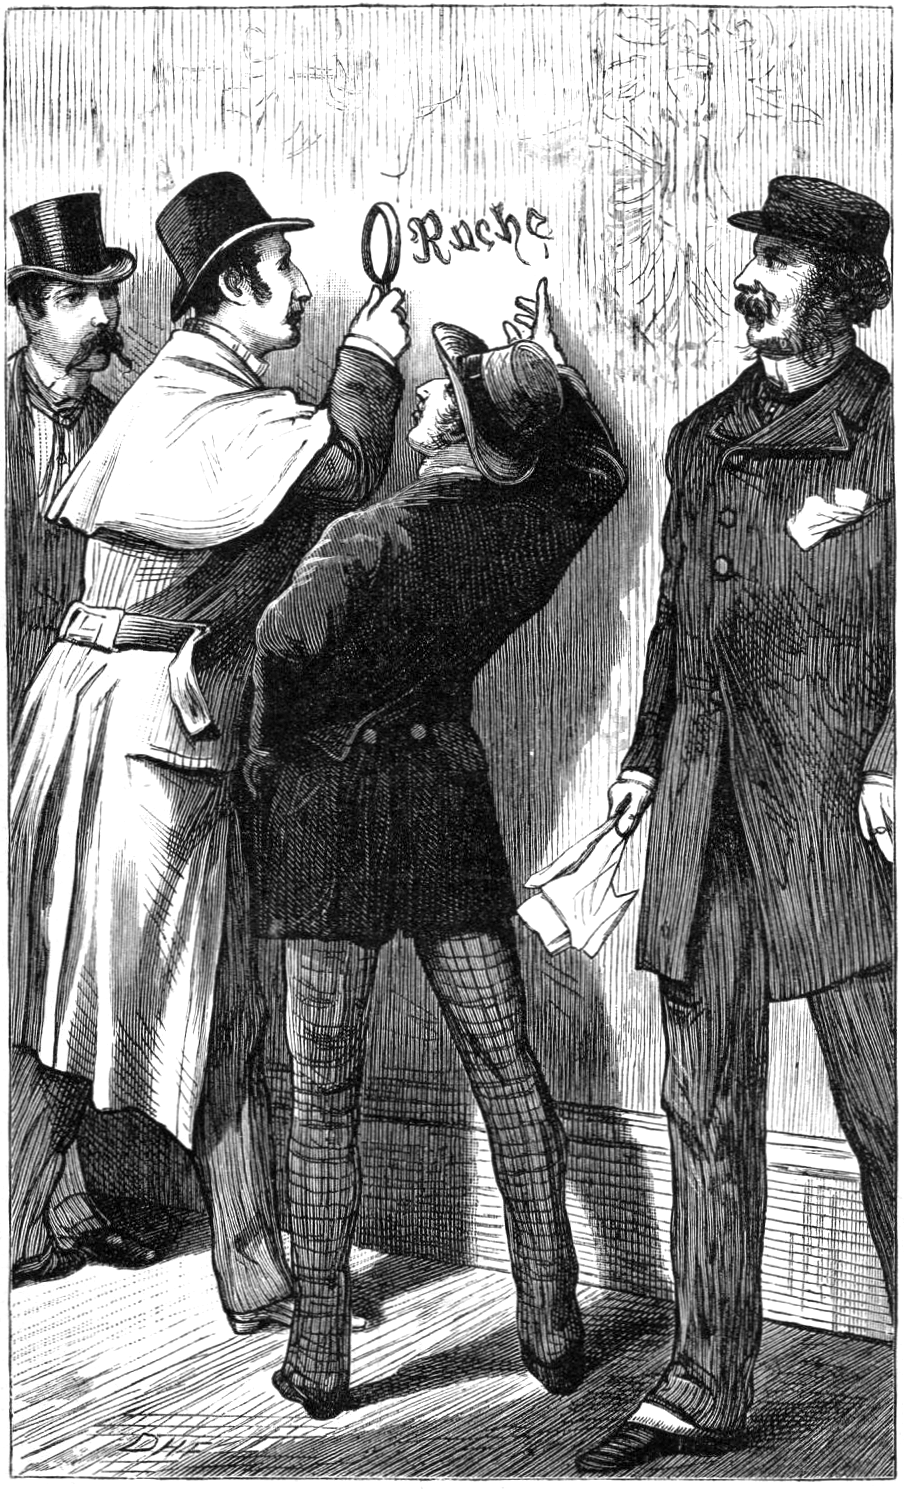 Illustration of Sherlock Holmes examining the word “Rache” on the wall with a magnifying glass.